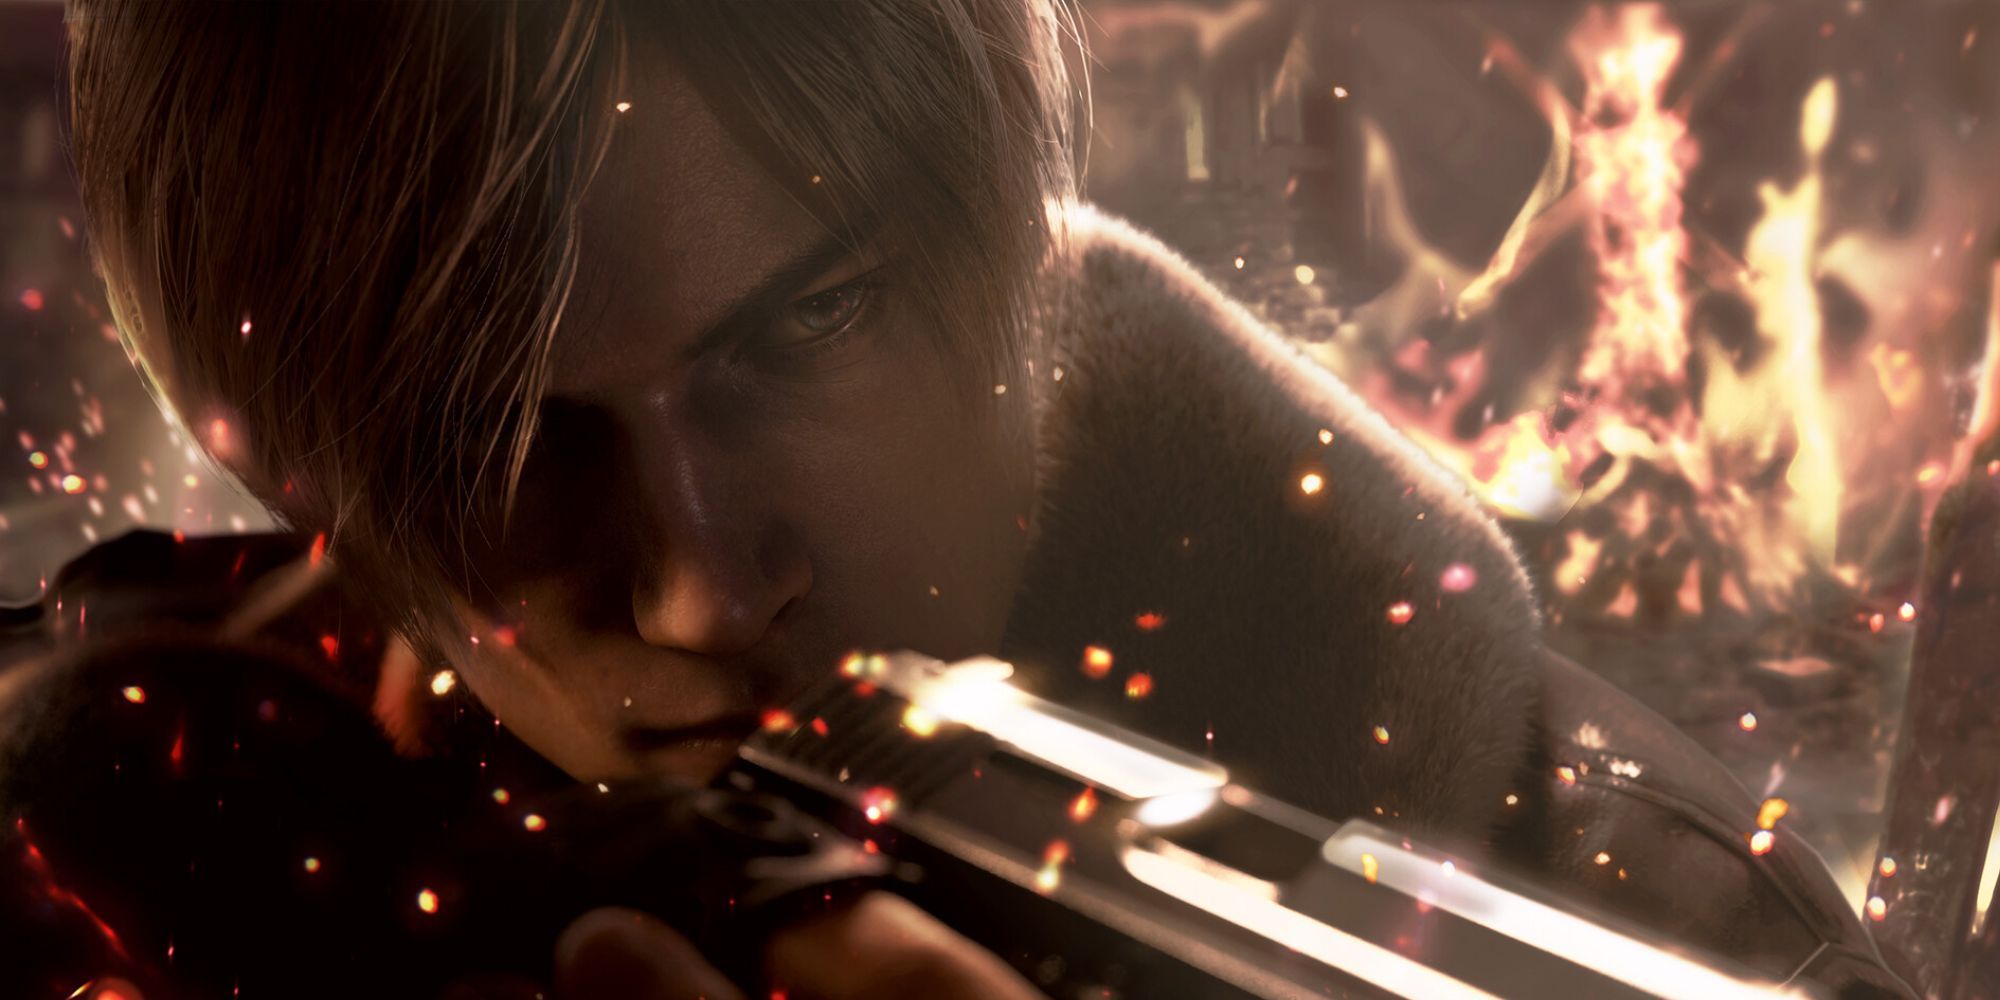 Leon in Resident Evil 4 remake aiming his pistol with flames engulfing him.